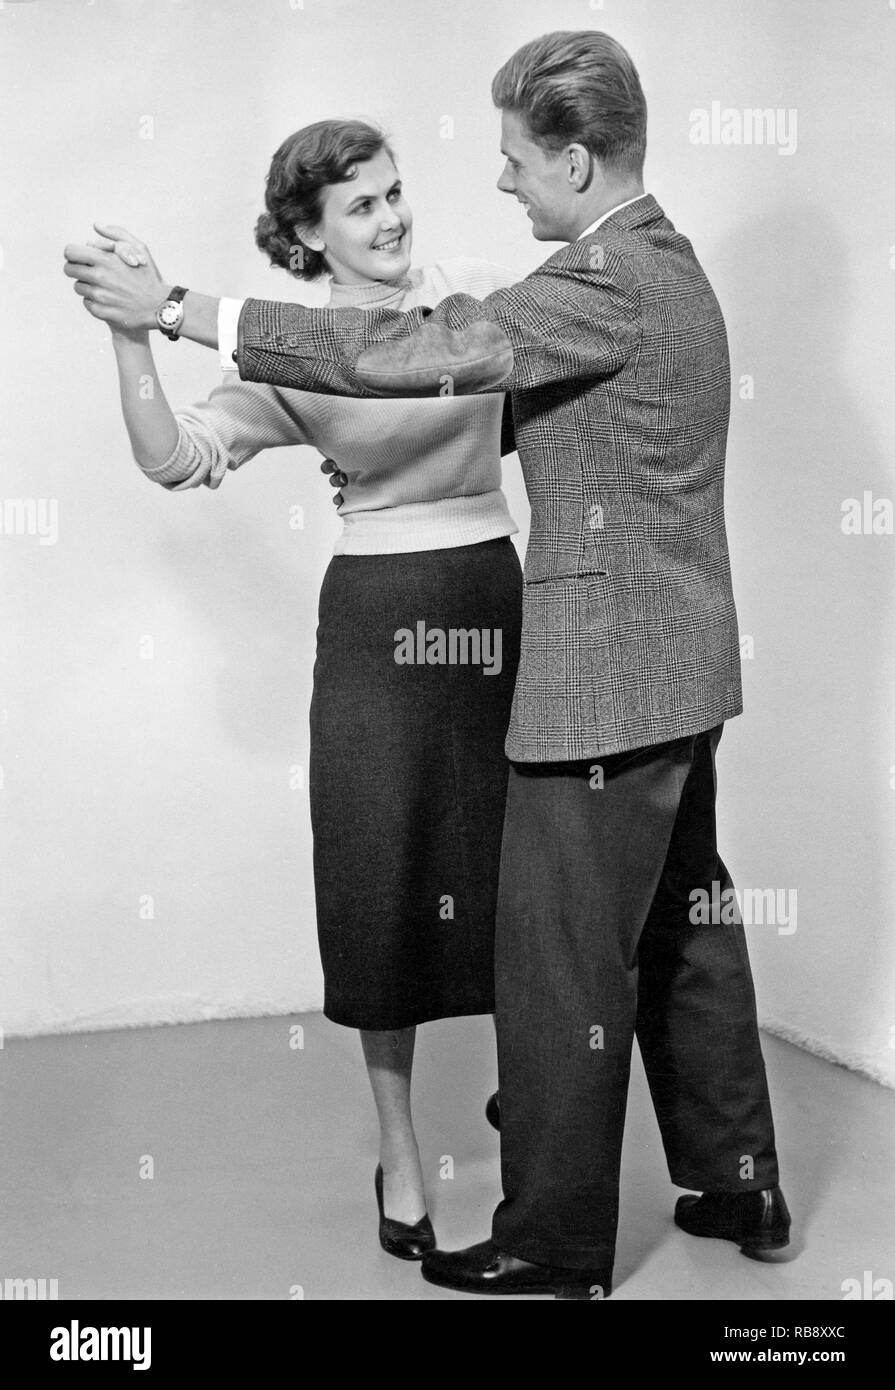 Learning to dance in the 1950s. A young copule is dancing. Sweden 1955 Stock Photo